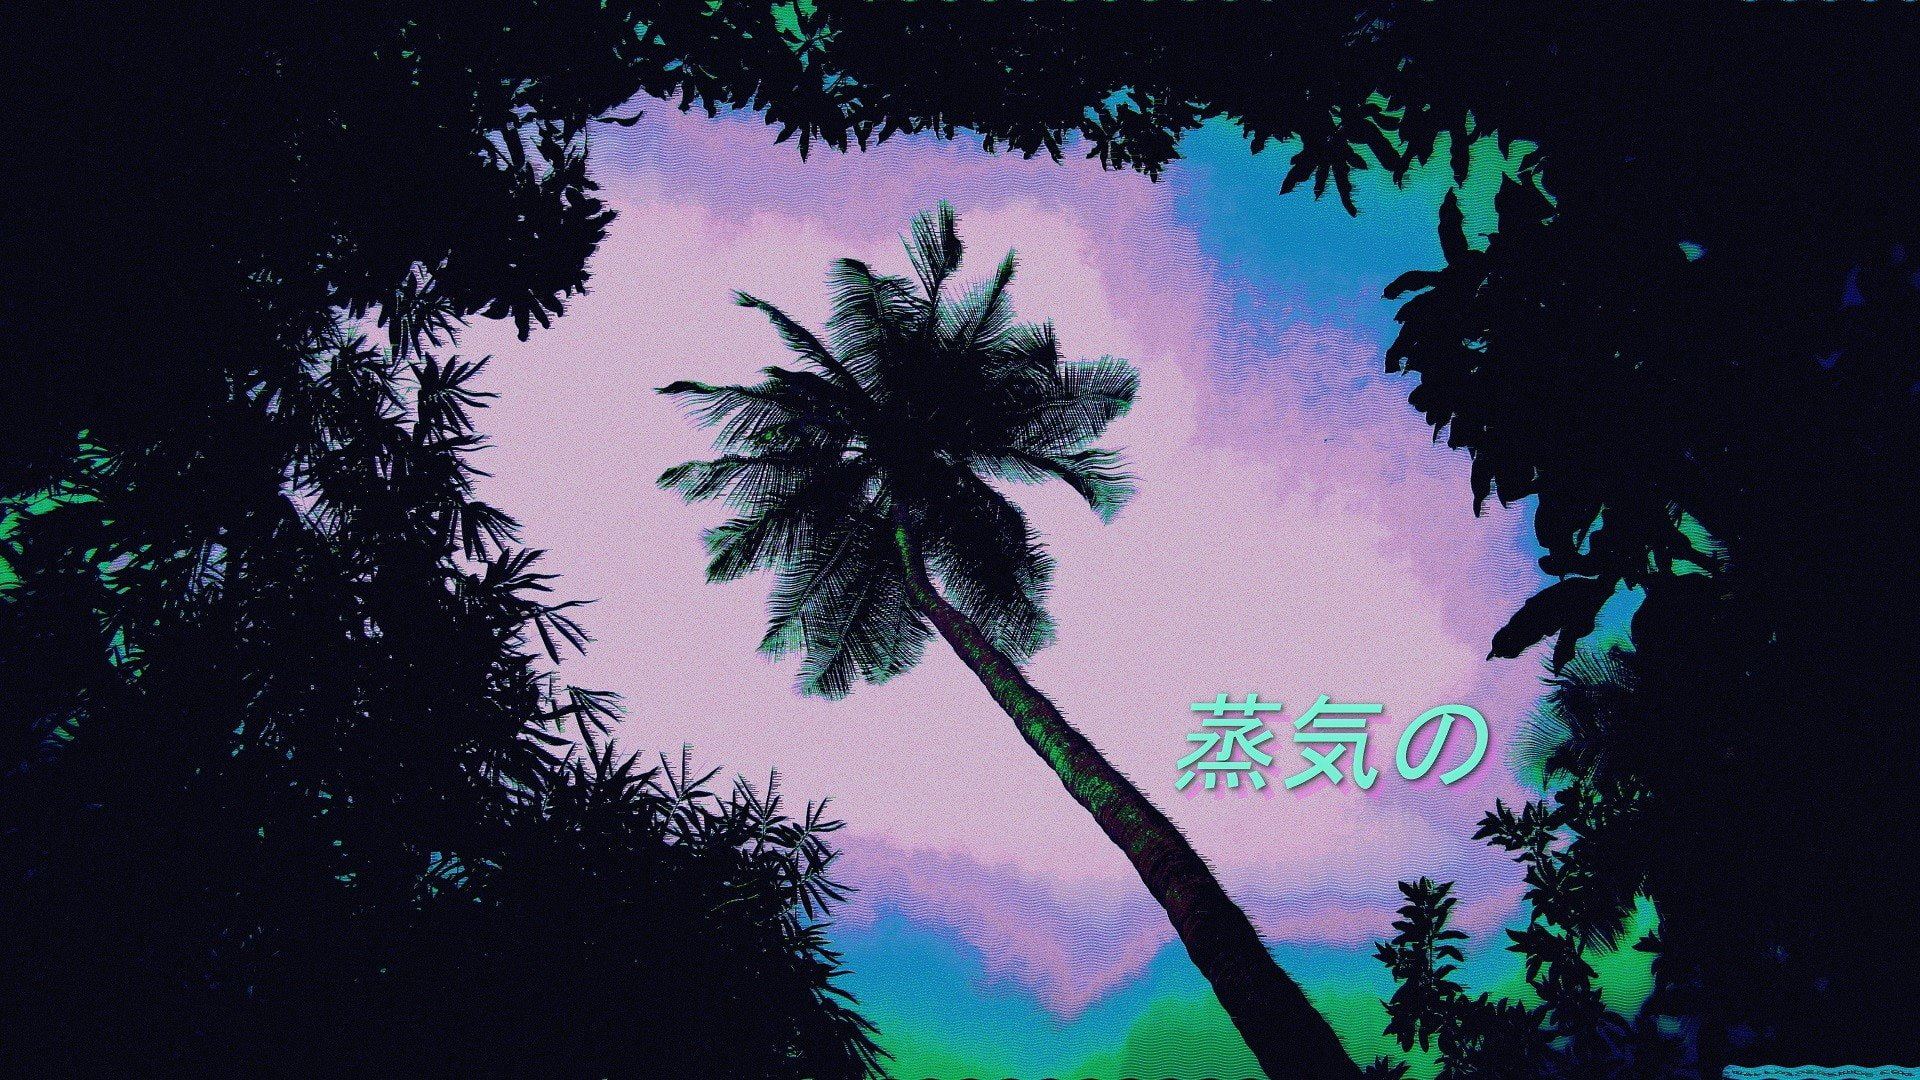 Aesthetic Wallpaper 1920x1080 Px Aesthetic Neon Nature Forests